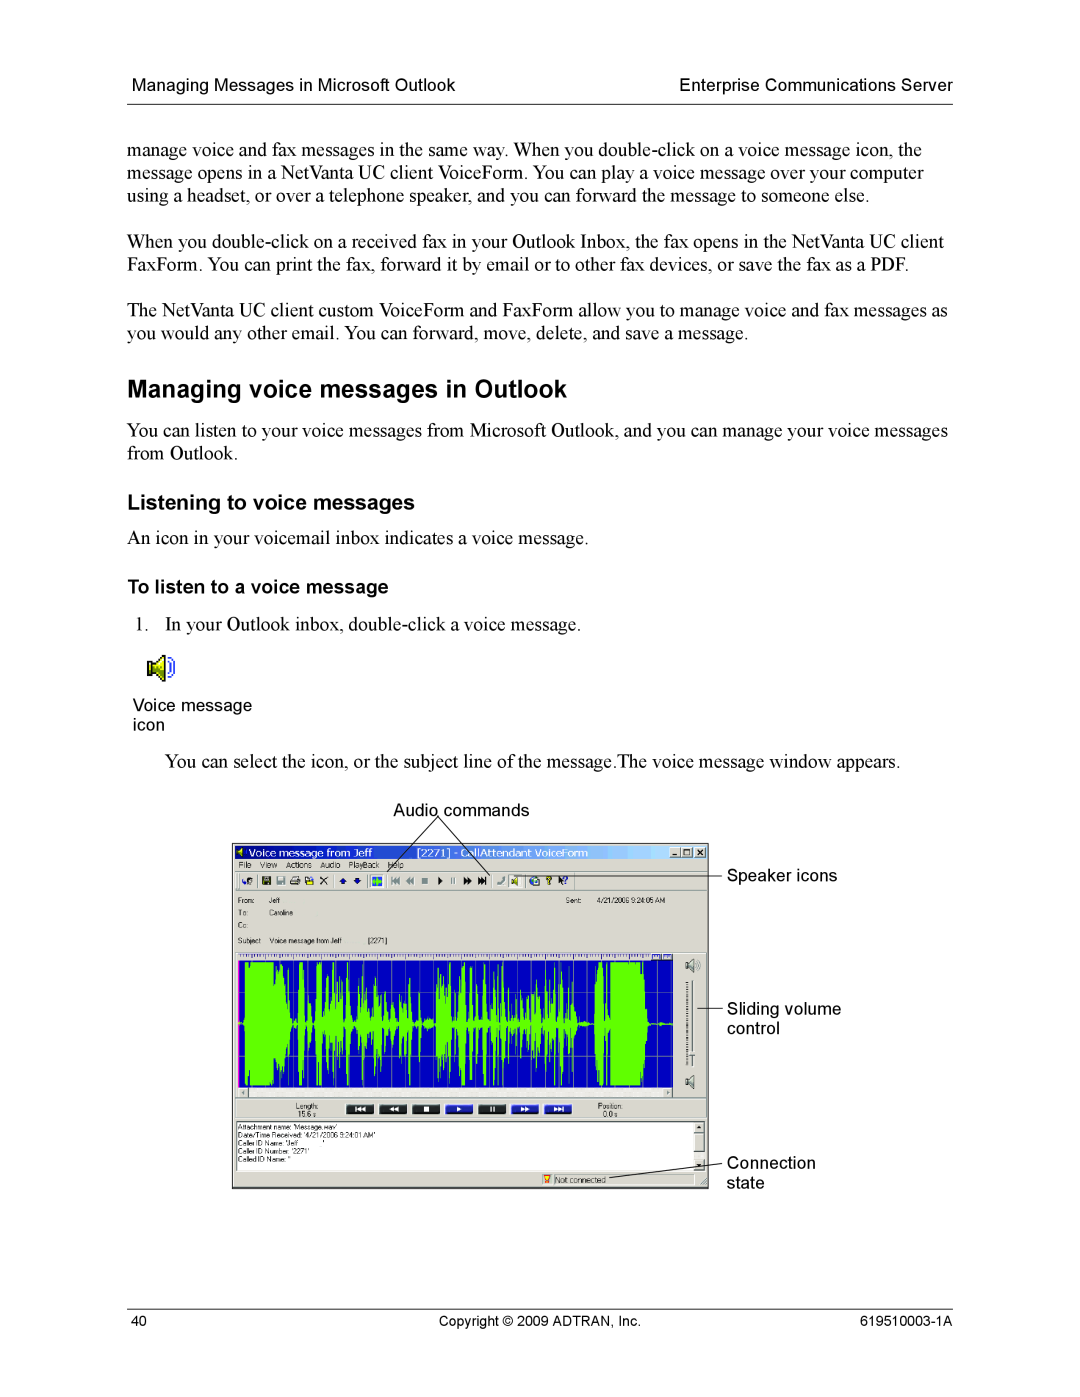 ADTRAN 619510003-1A manual Managing voice messages in Outlook, Listening to voice messages, To listen to a voice message 